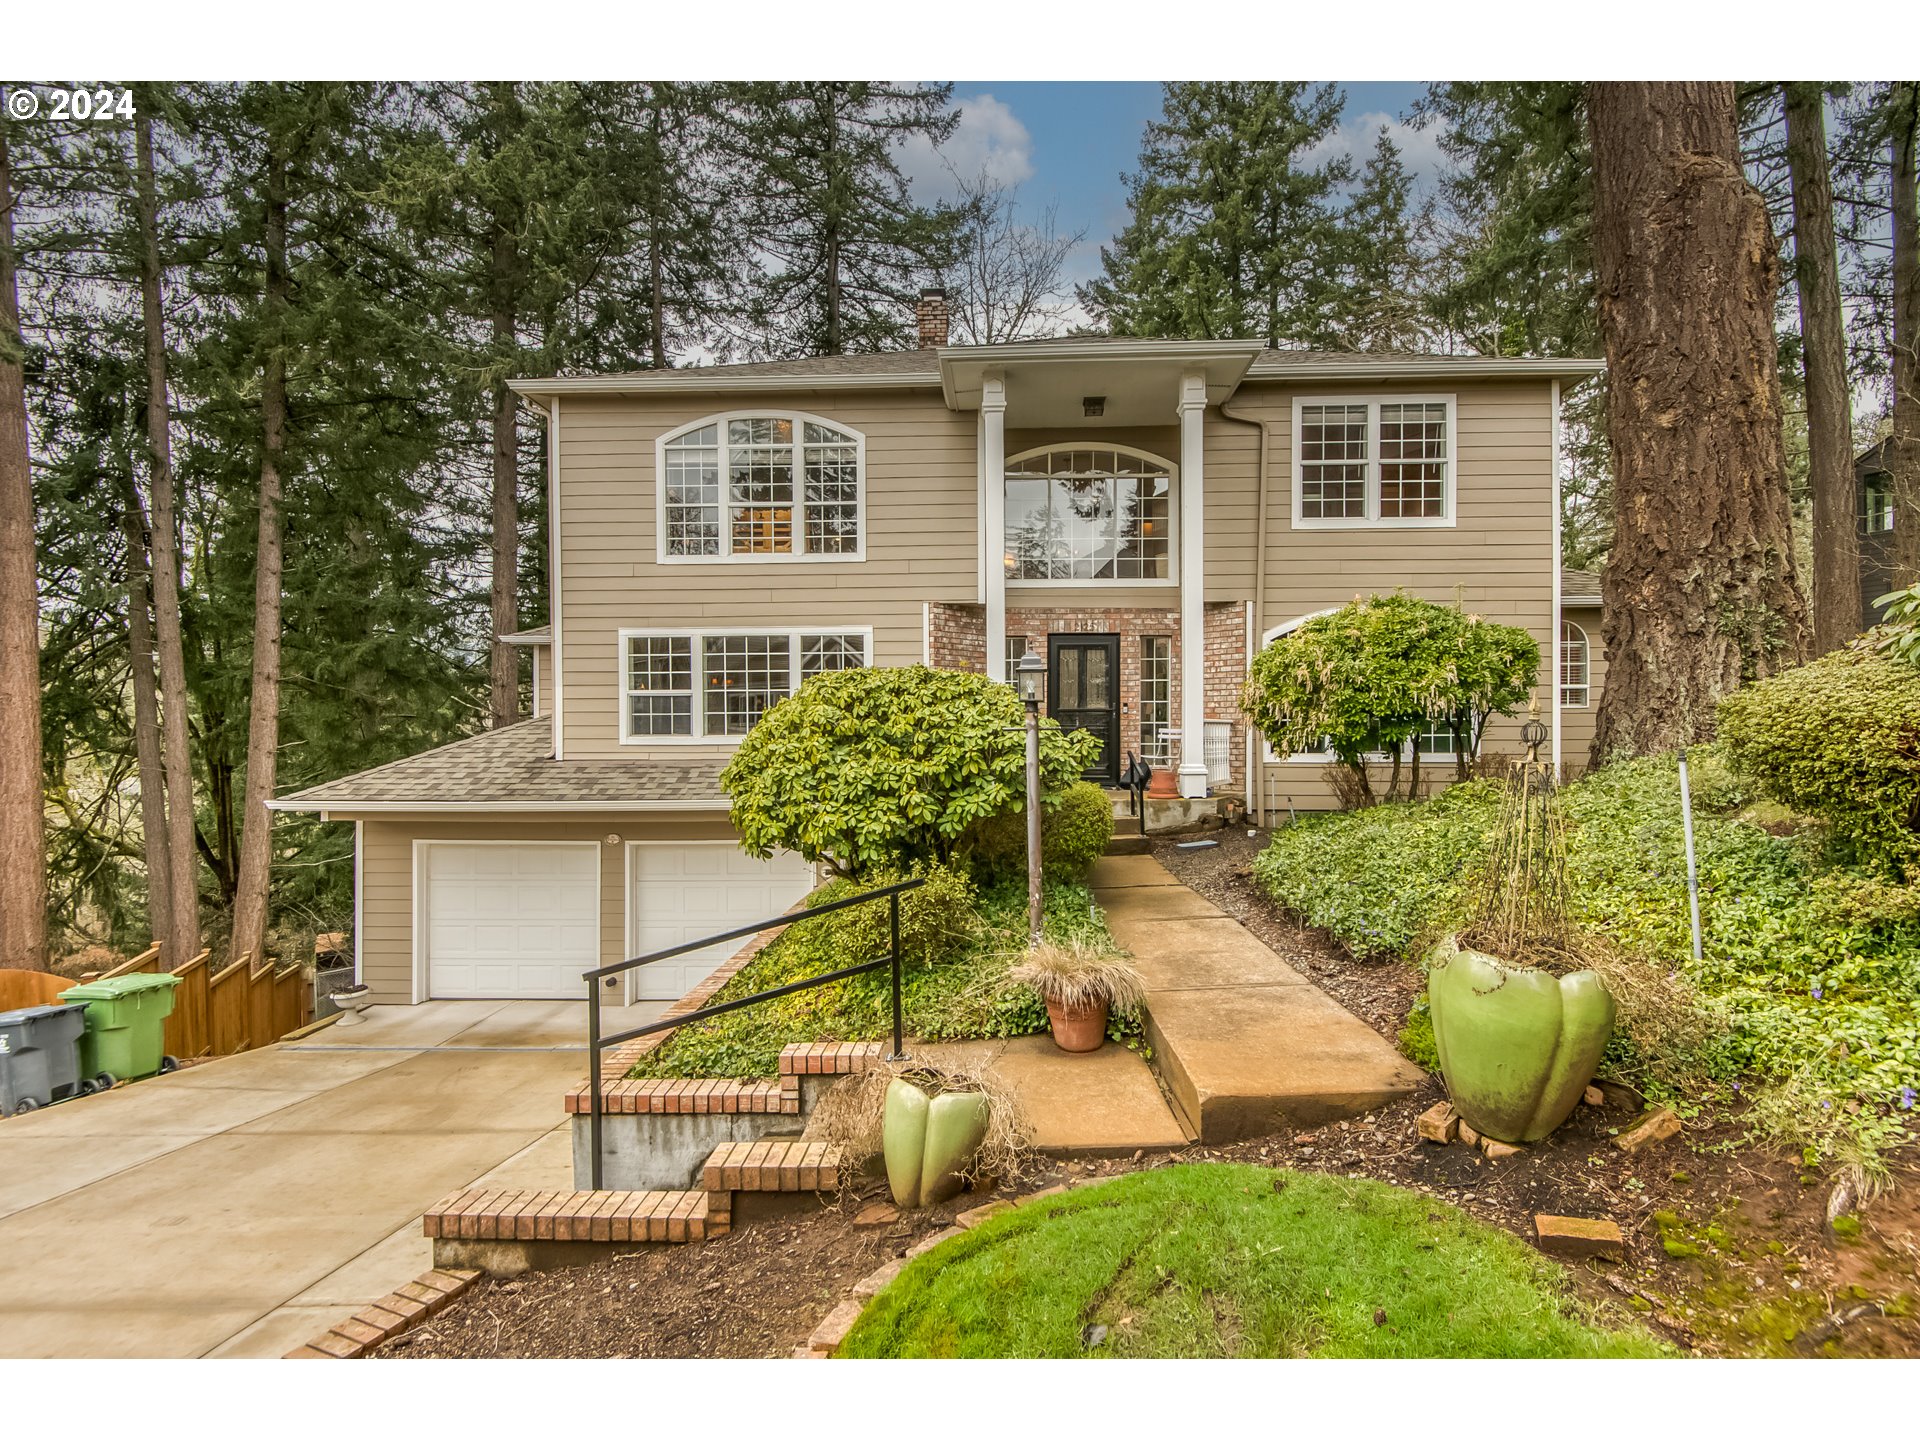 2125 MARVIN CT NW, Salem, OR 